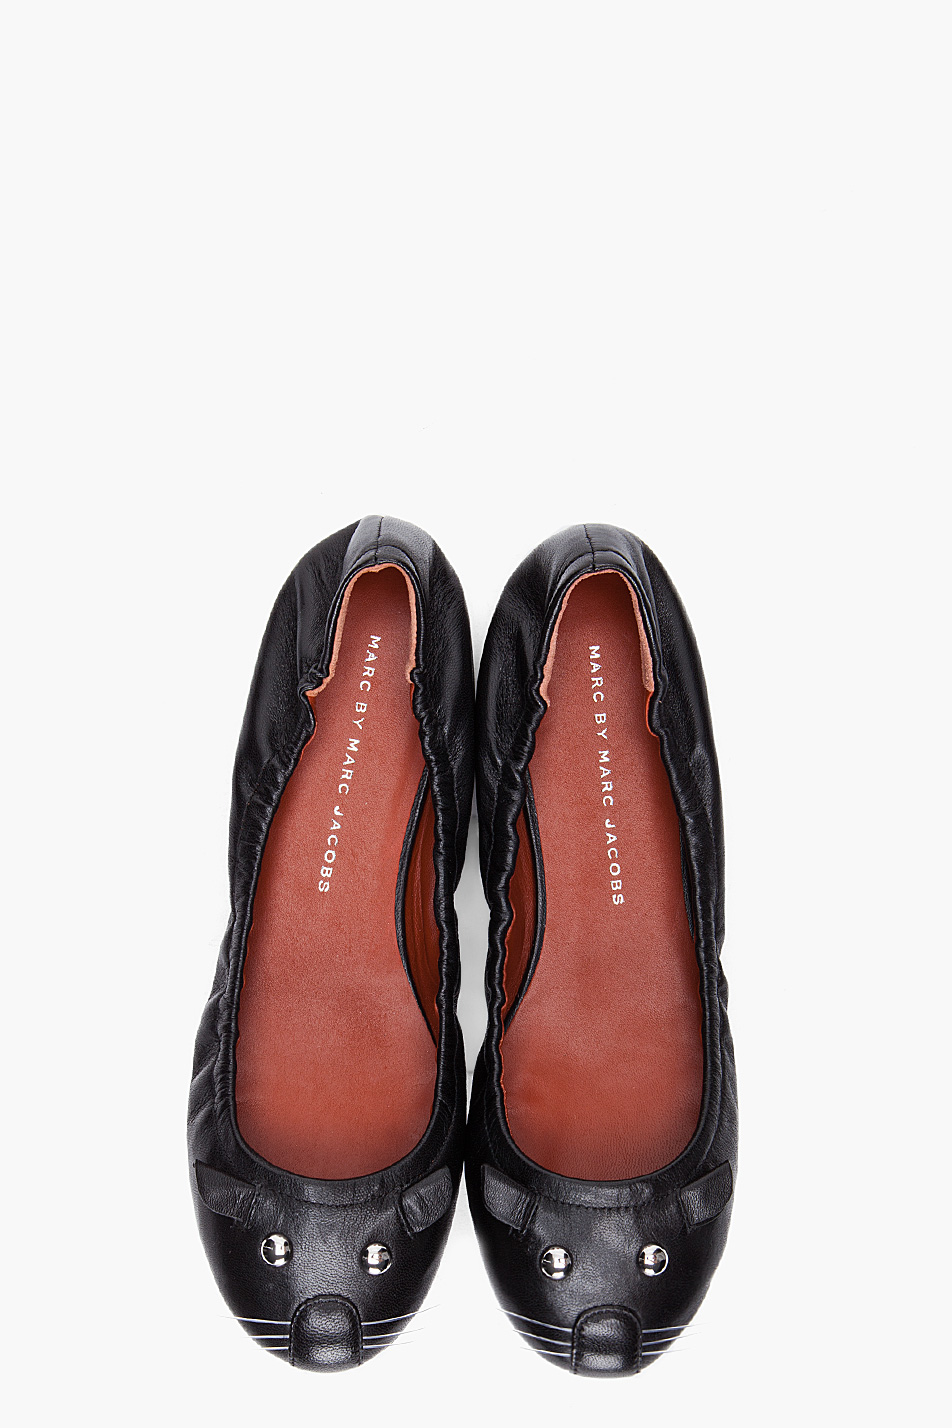 Marc By Marc Jacobs Flats Switzerland, SAVE 36% - aveclumiere.com